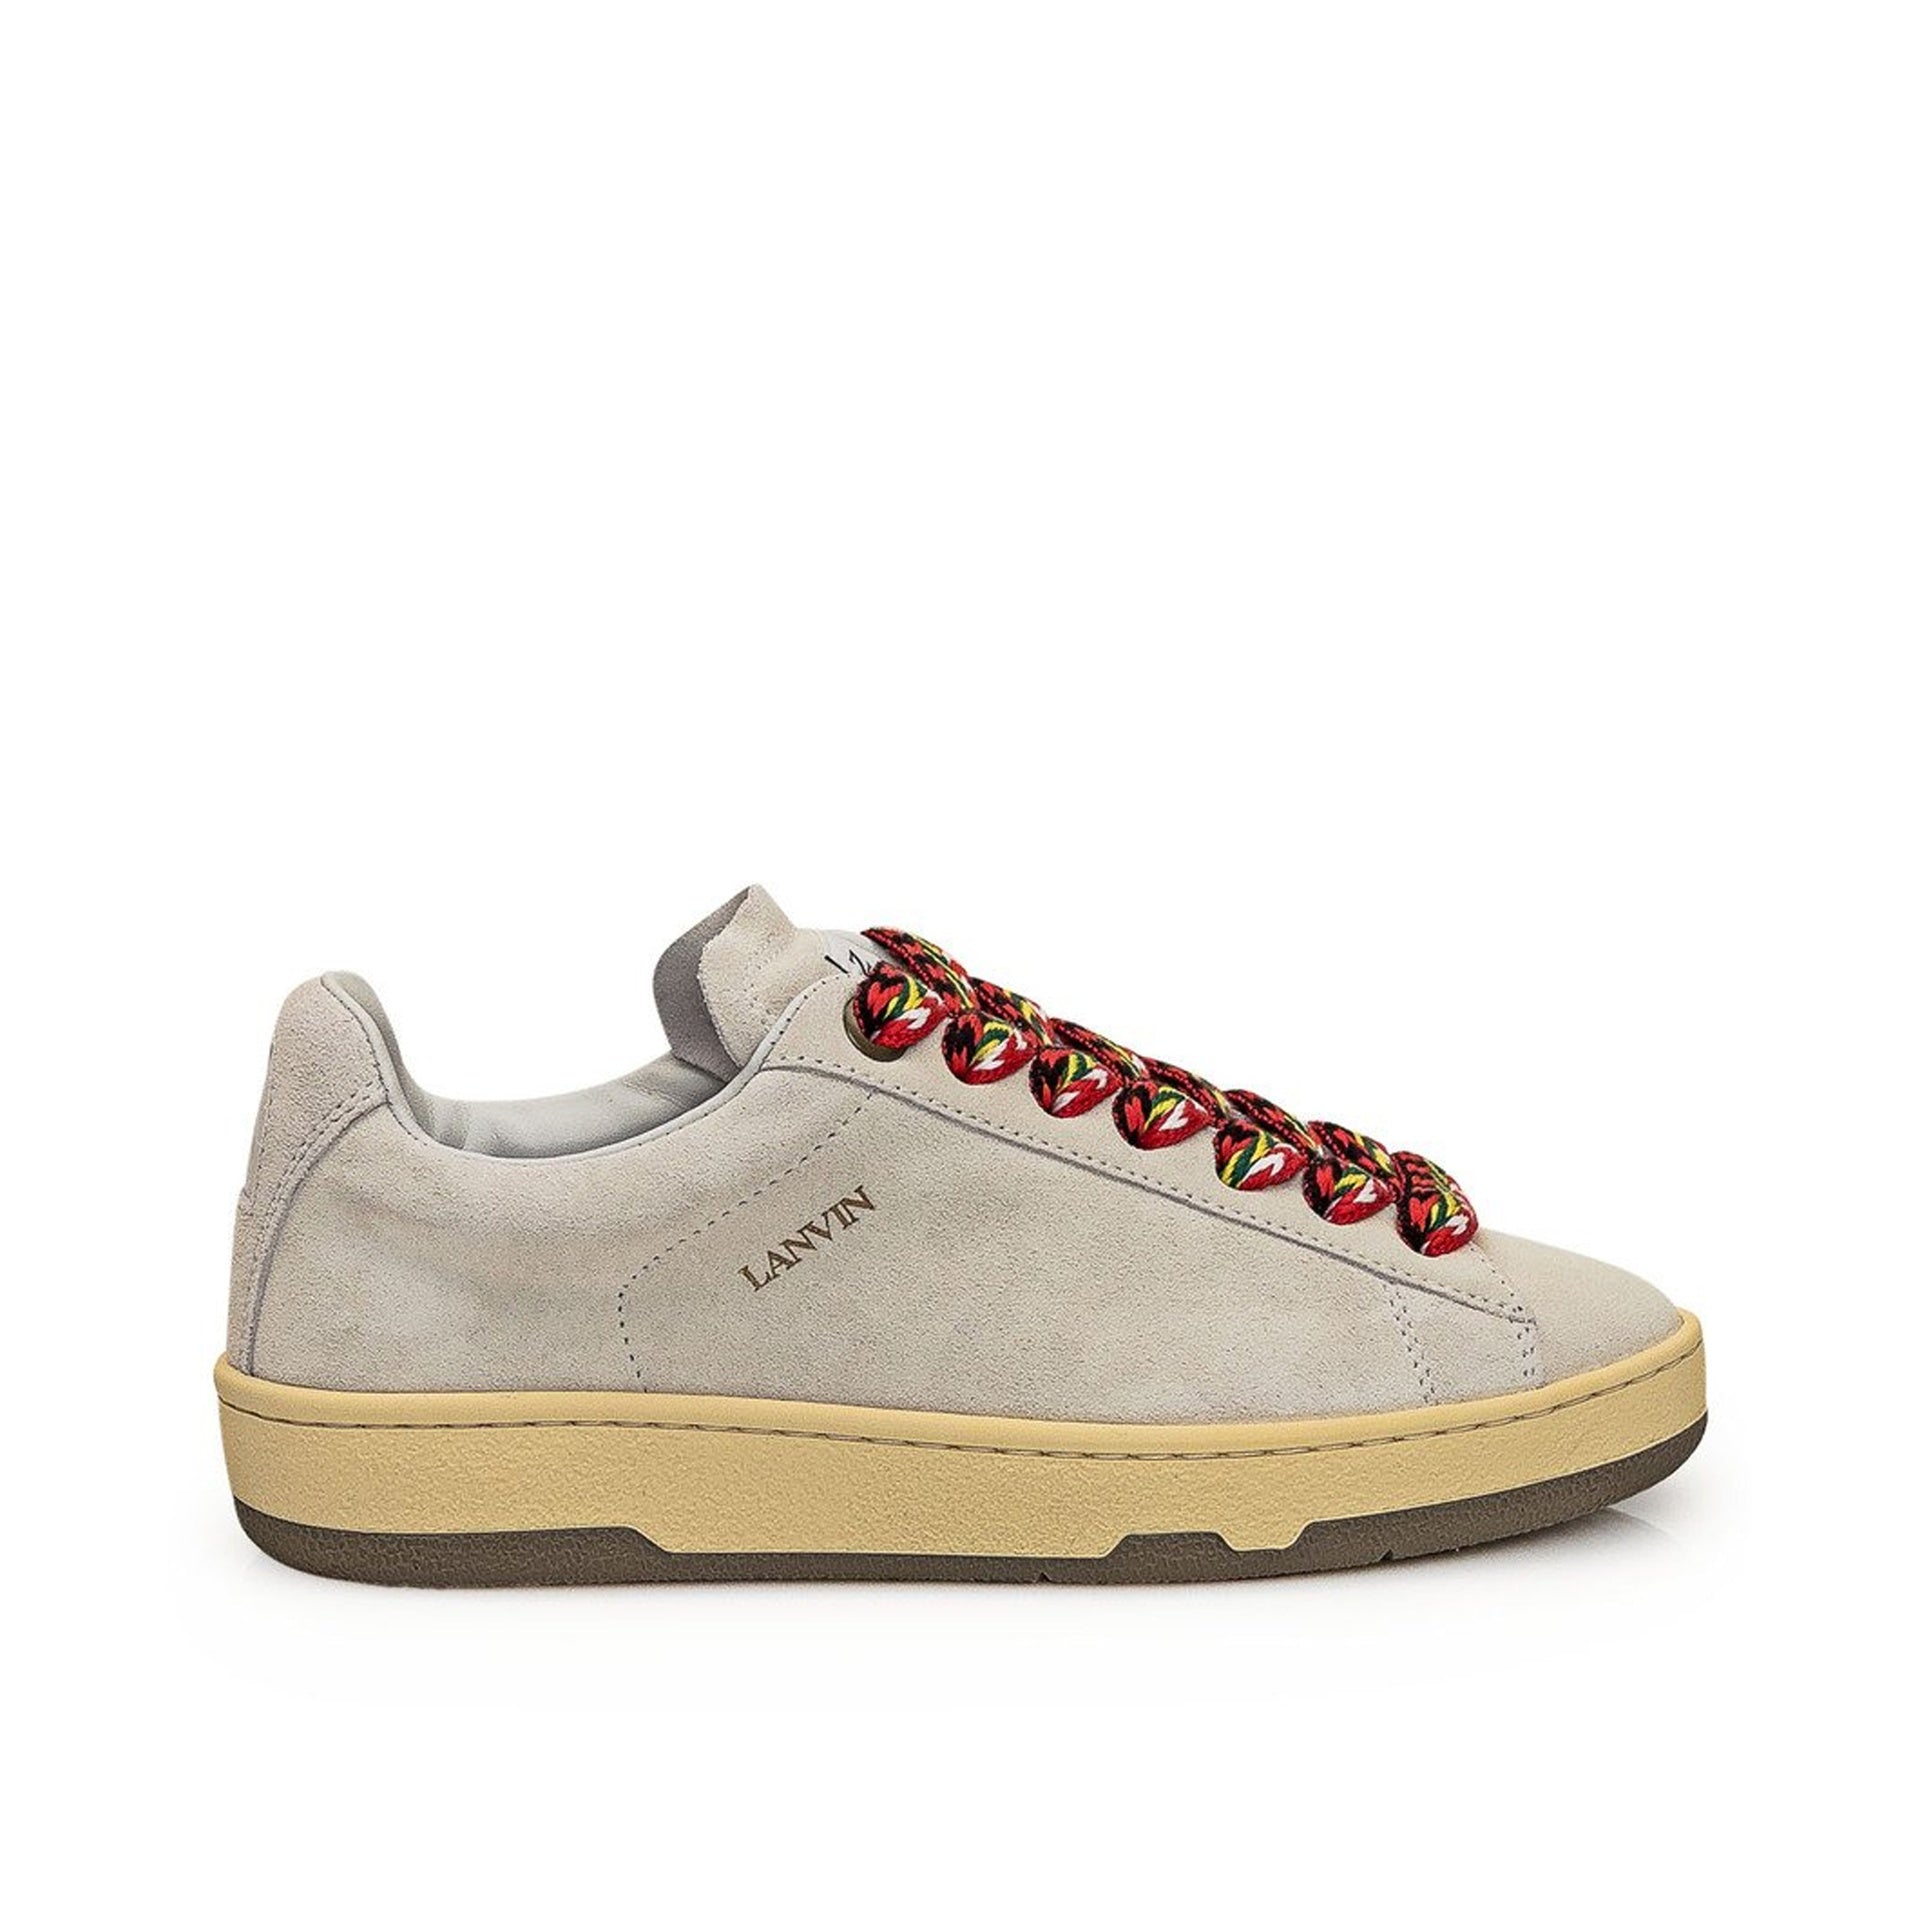 LANVIN-OUTLET-SALE-Lanvin-Curb-Sneakers-Sneakers-GRAY-36-ARCHIVE-COLLECTION.jpg